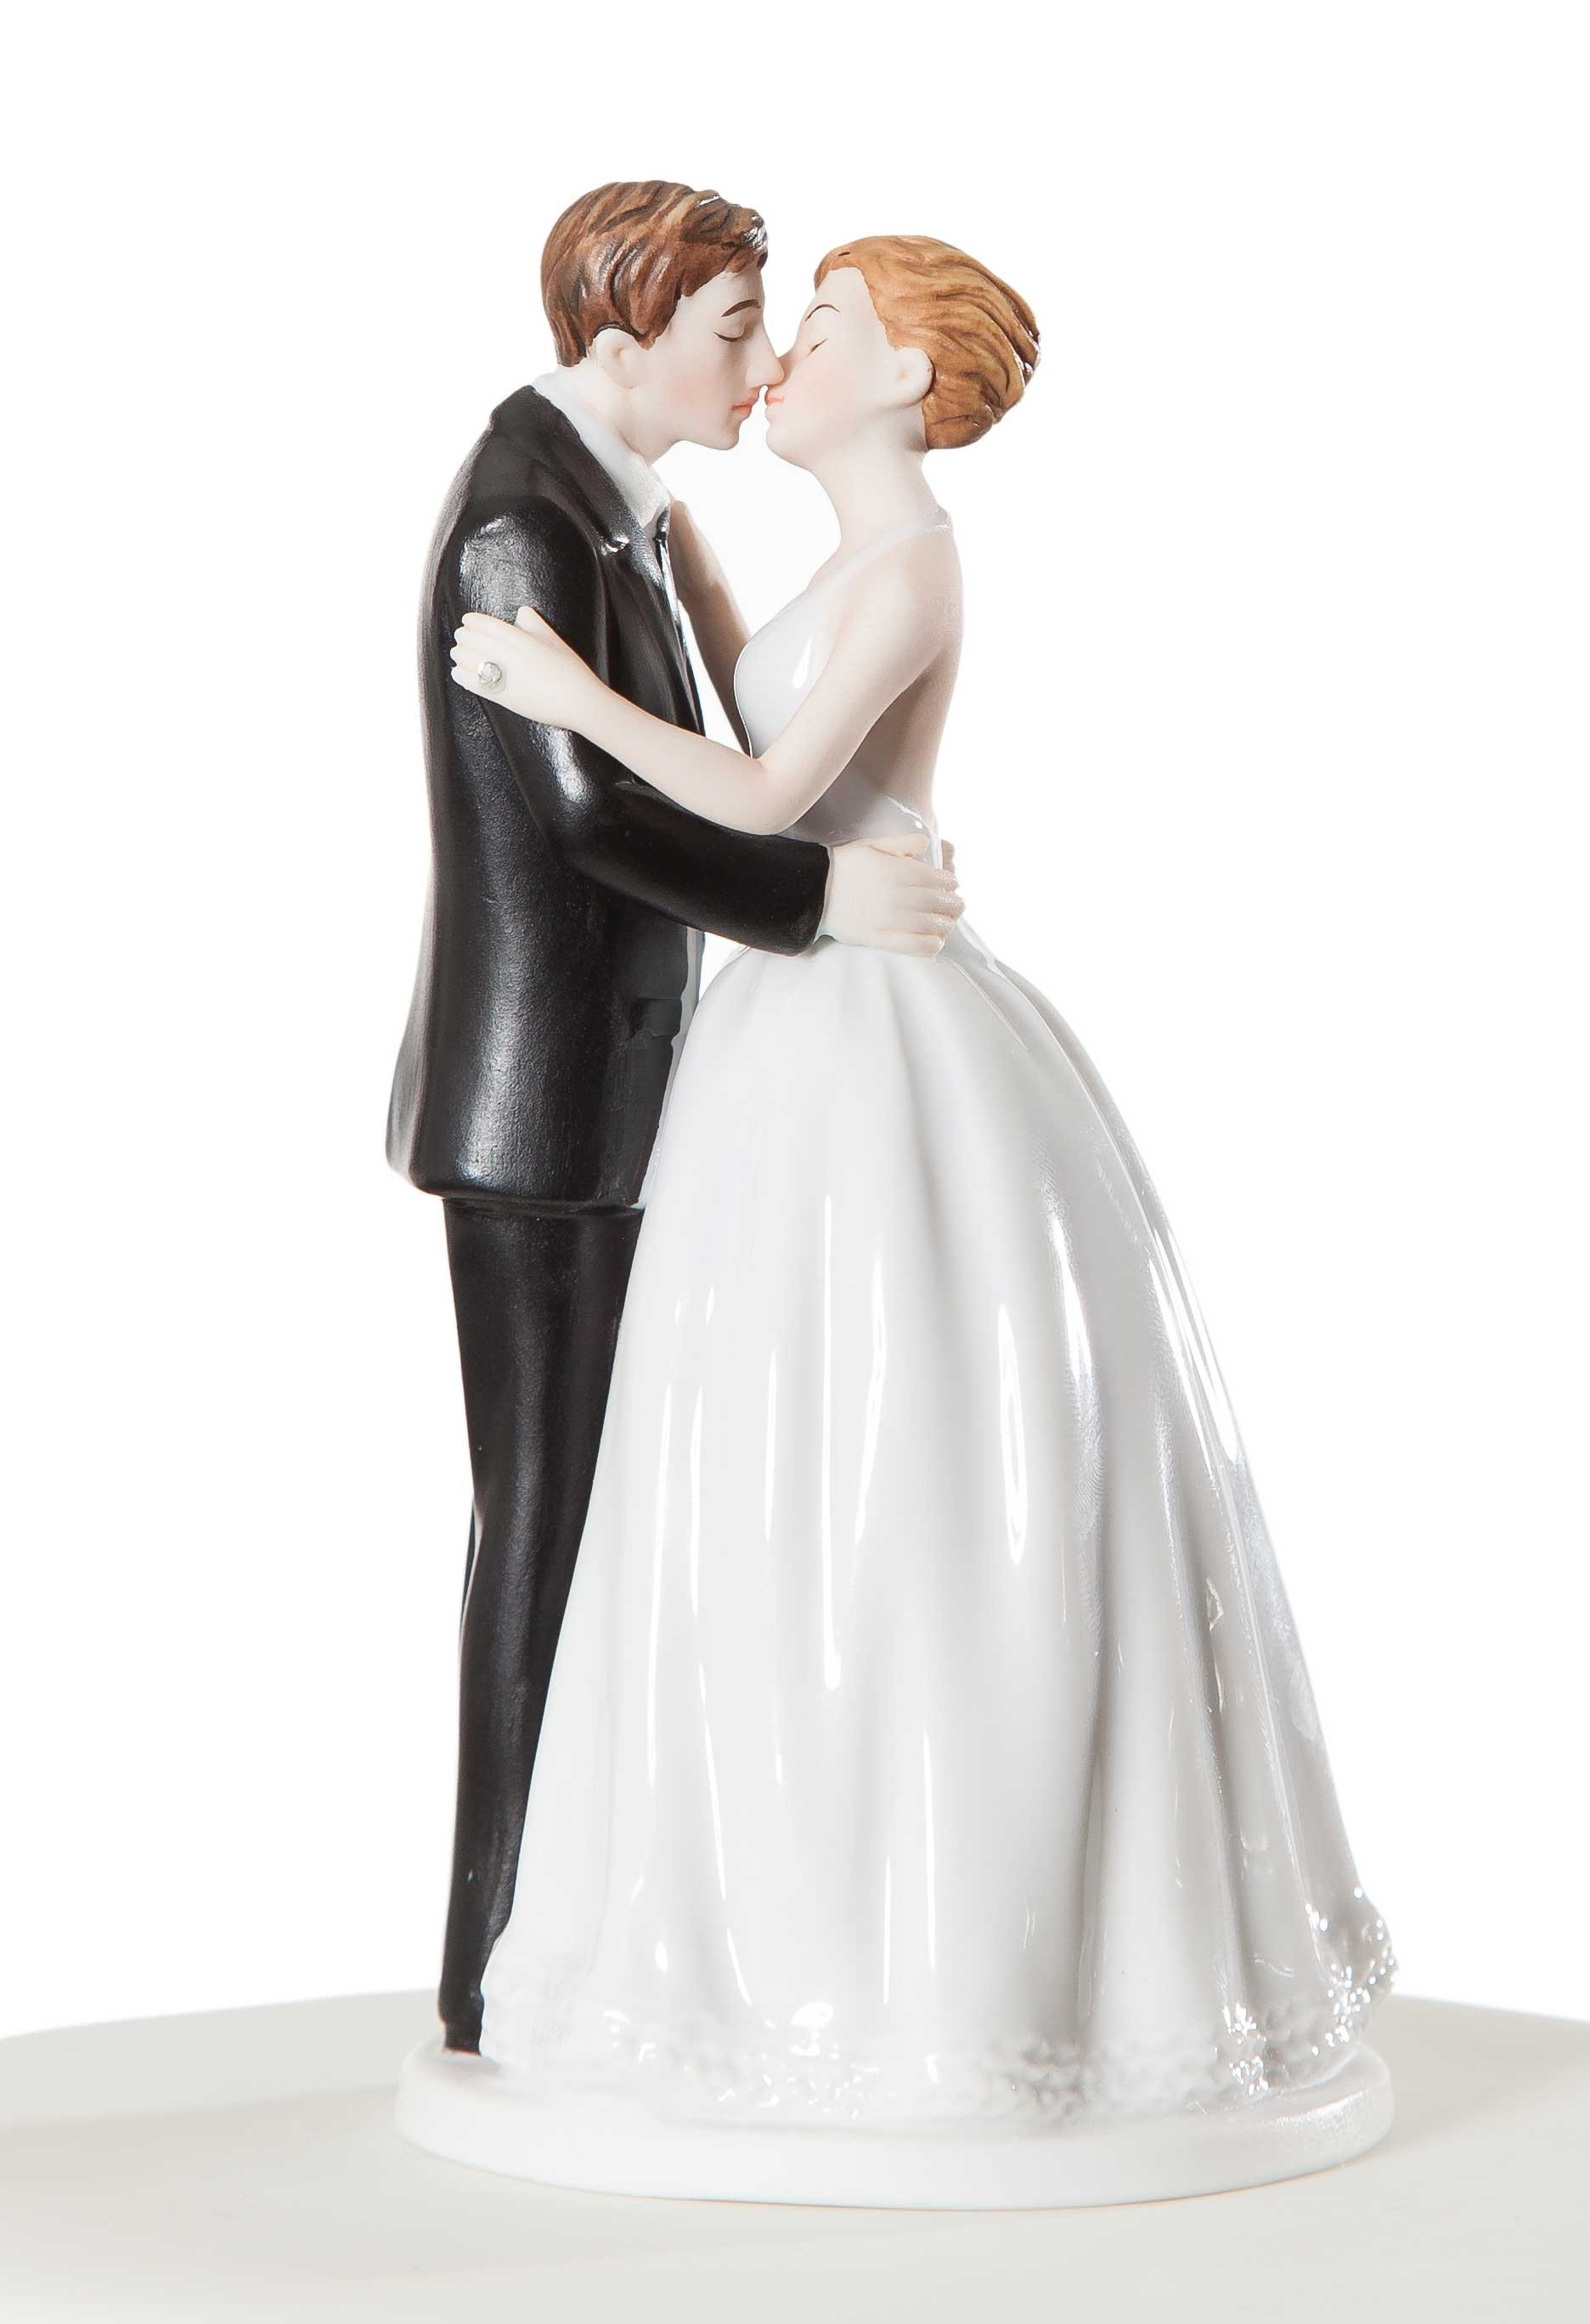 Cake Toppers For Wedding Cakes
 Vintage Style Wedding Cake Toppers